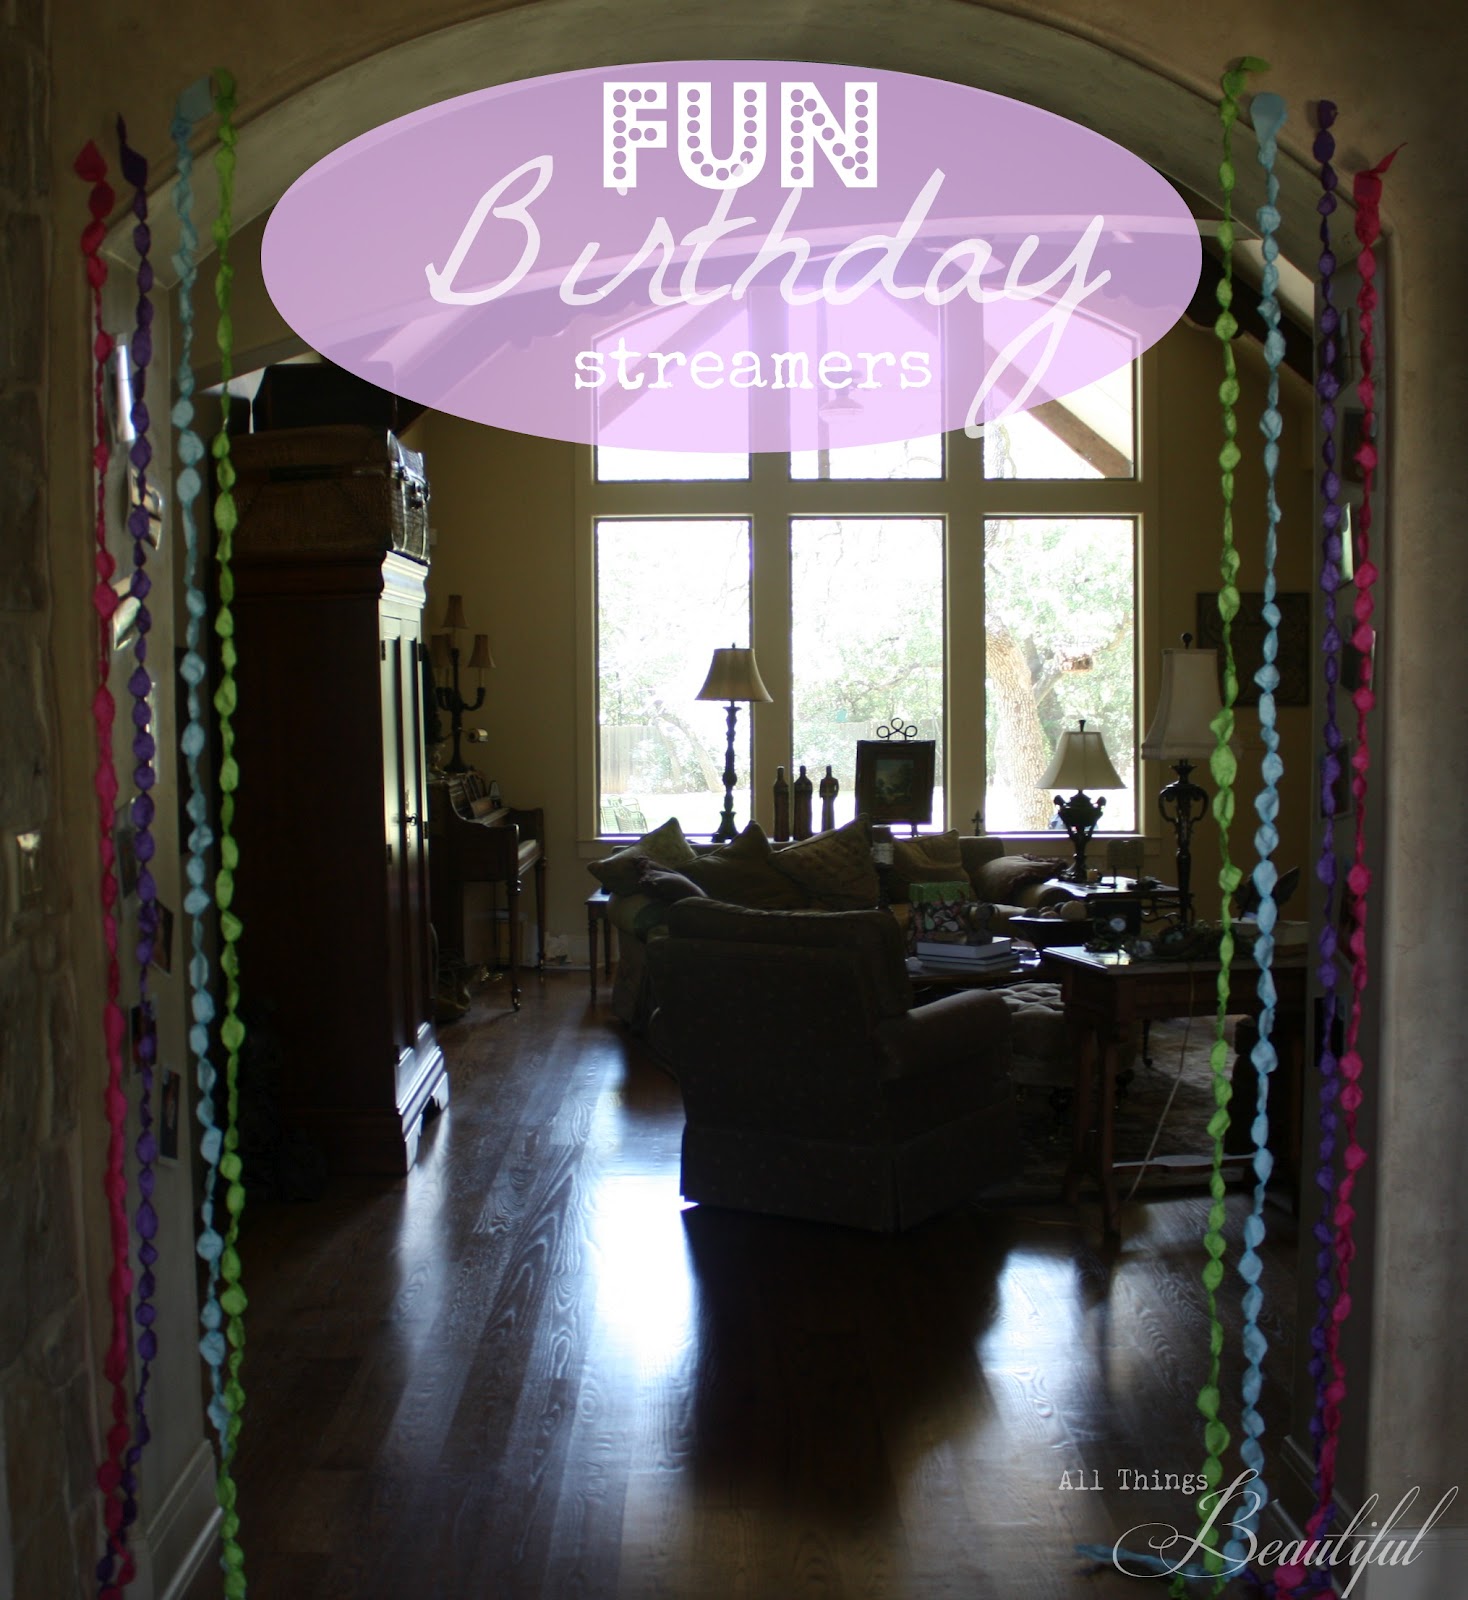 39 Streamer fun ideas  streamer decorations, streamers, party decorations